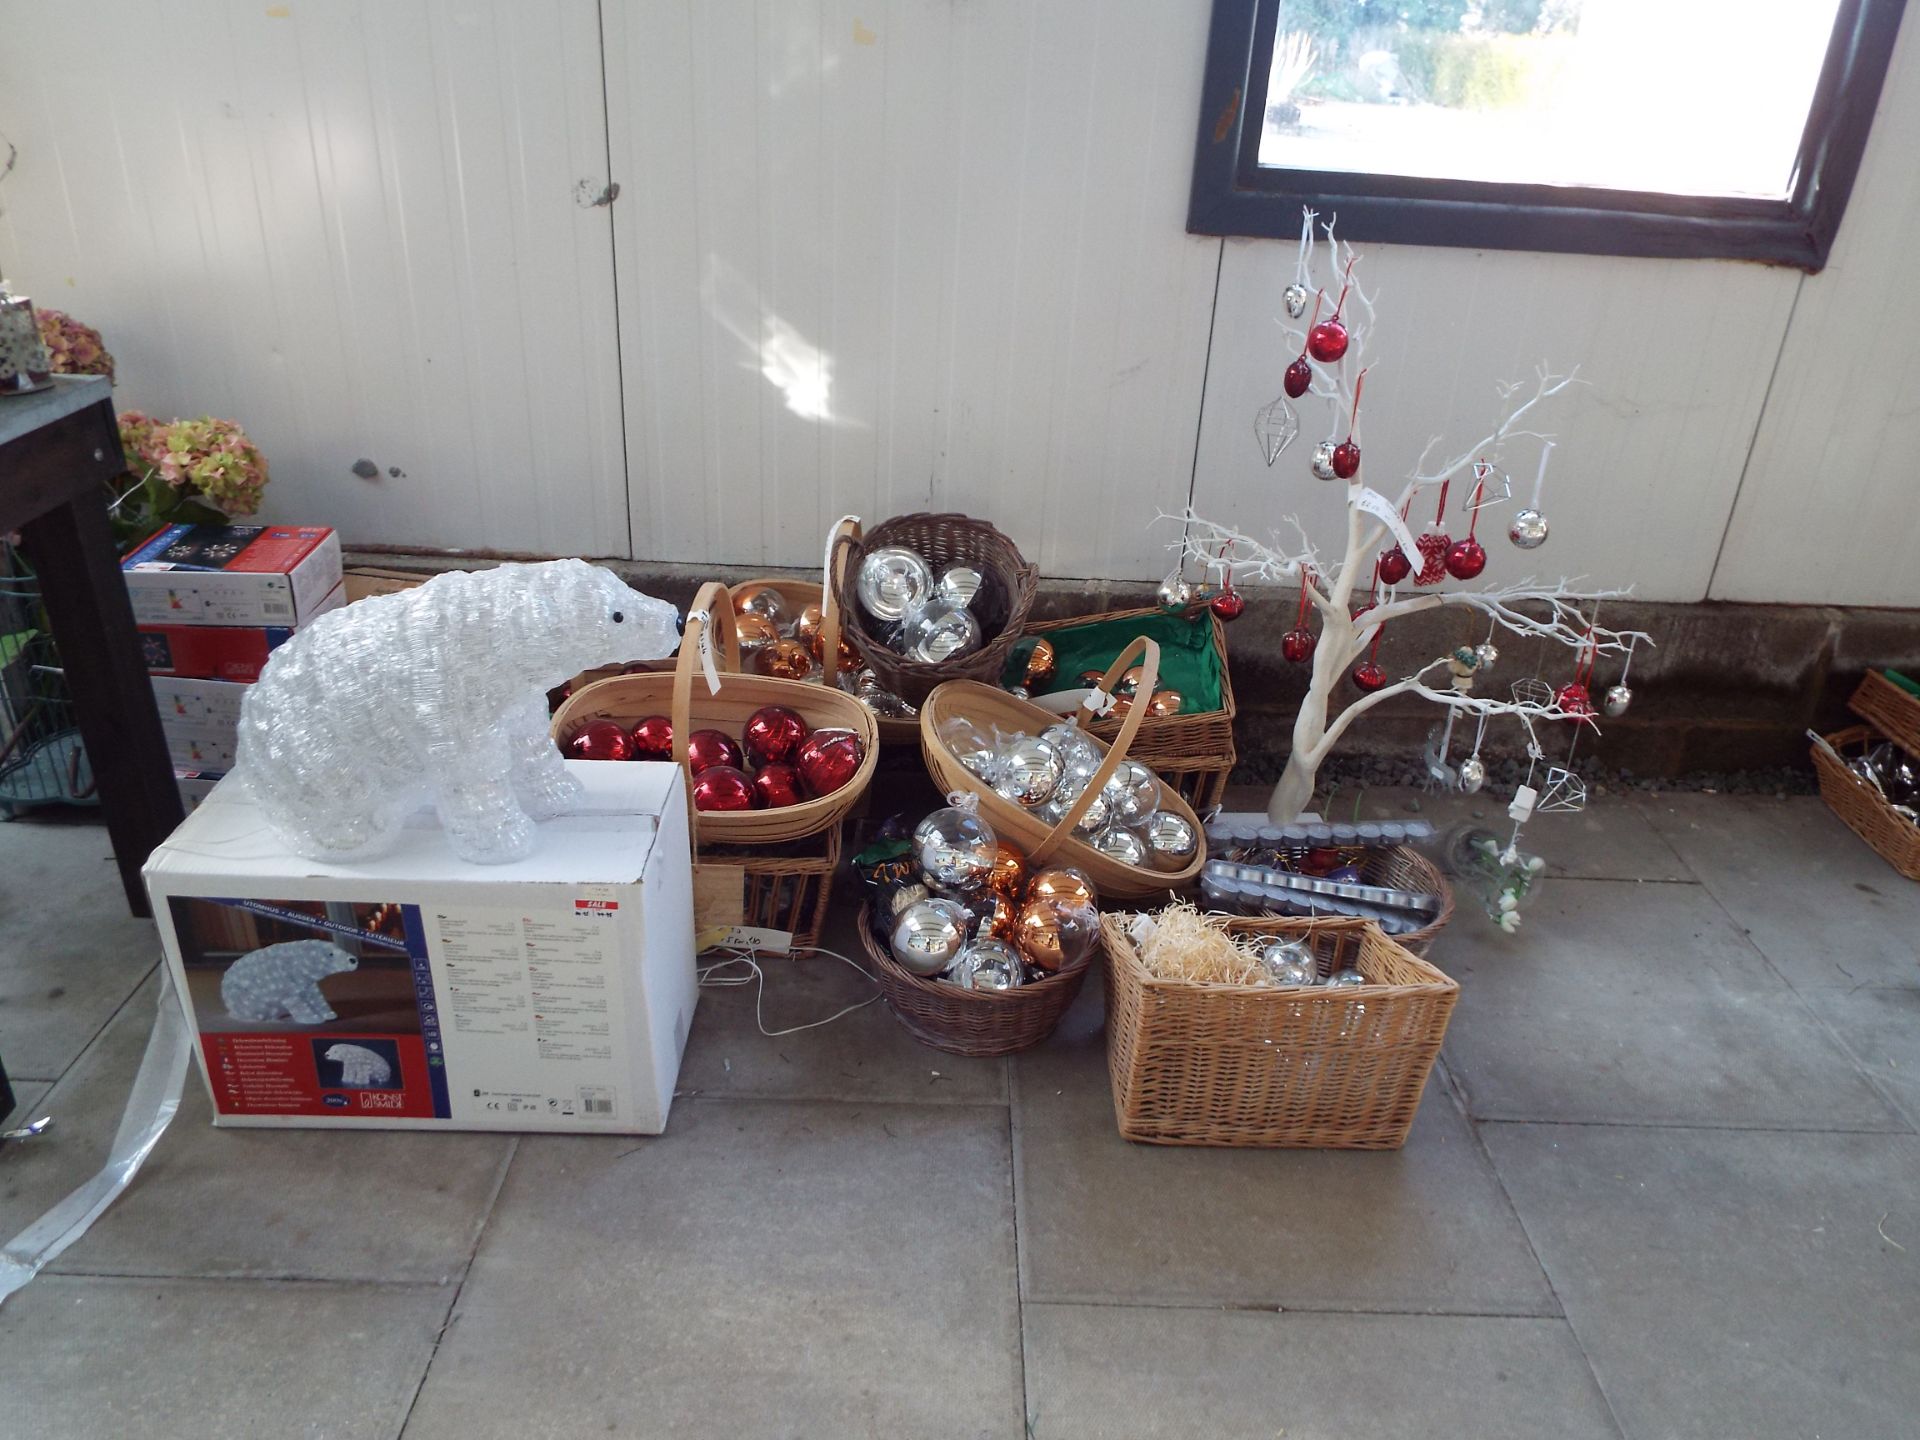 Large Selection of Christmas Baubles/Decorations, Illuminated Polar Bear and Toiletries